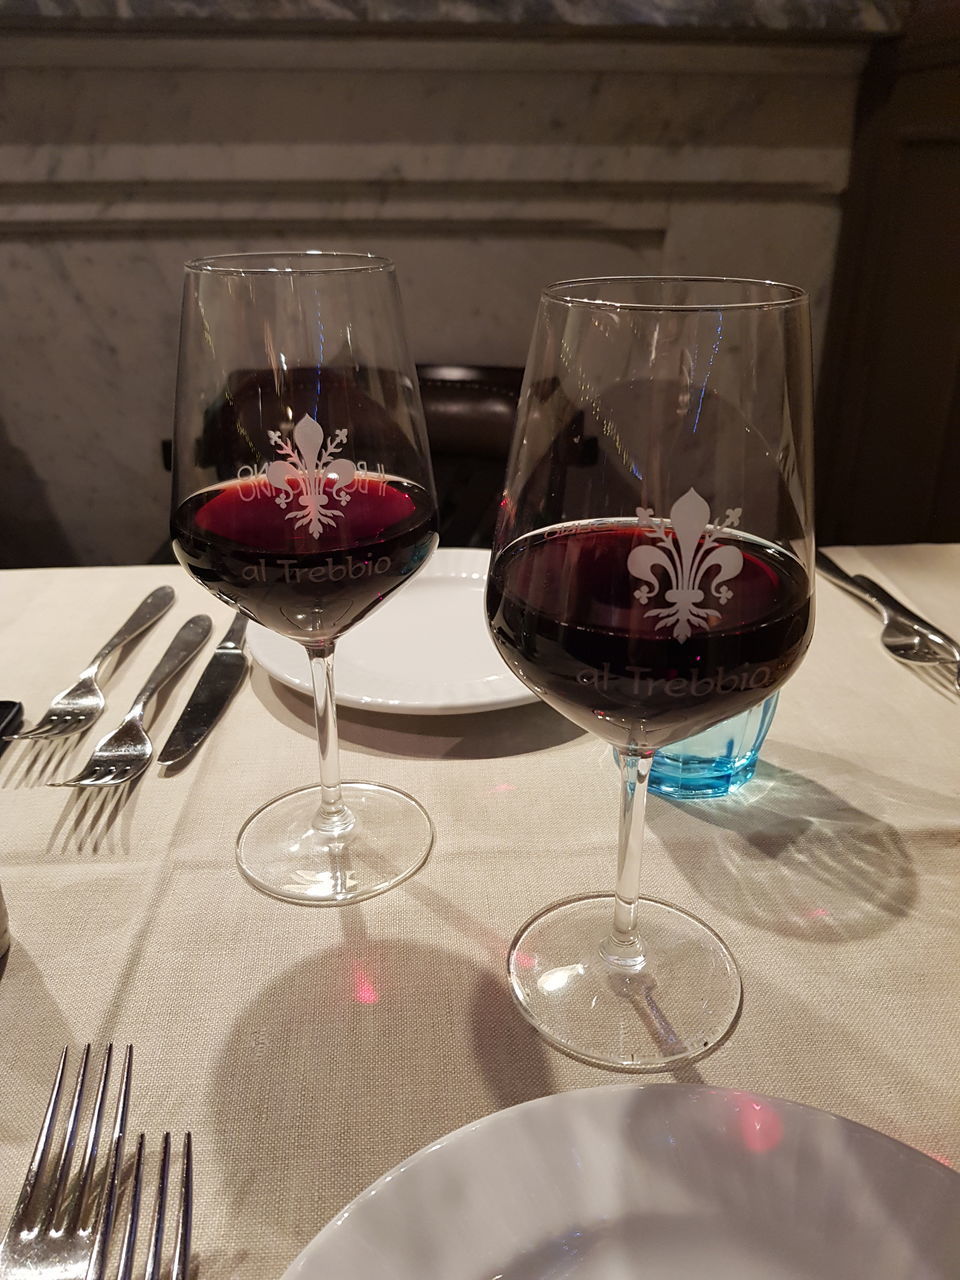 CLOSE-UP OF GLASS OF WINE GLASSES ON TABLE